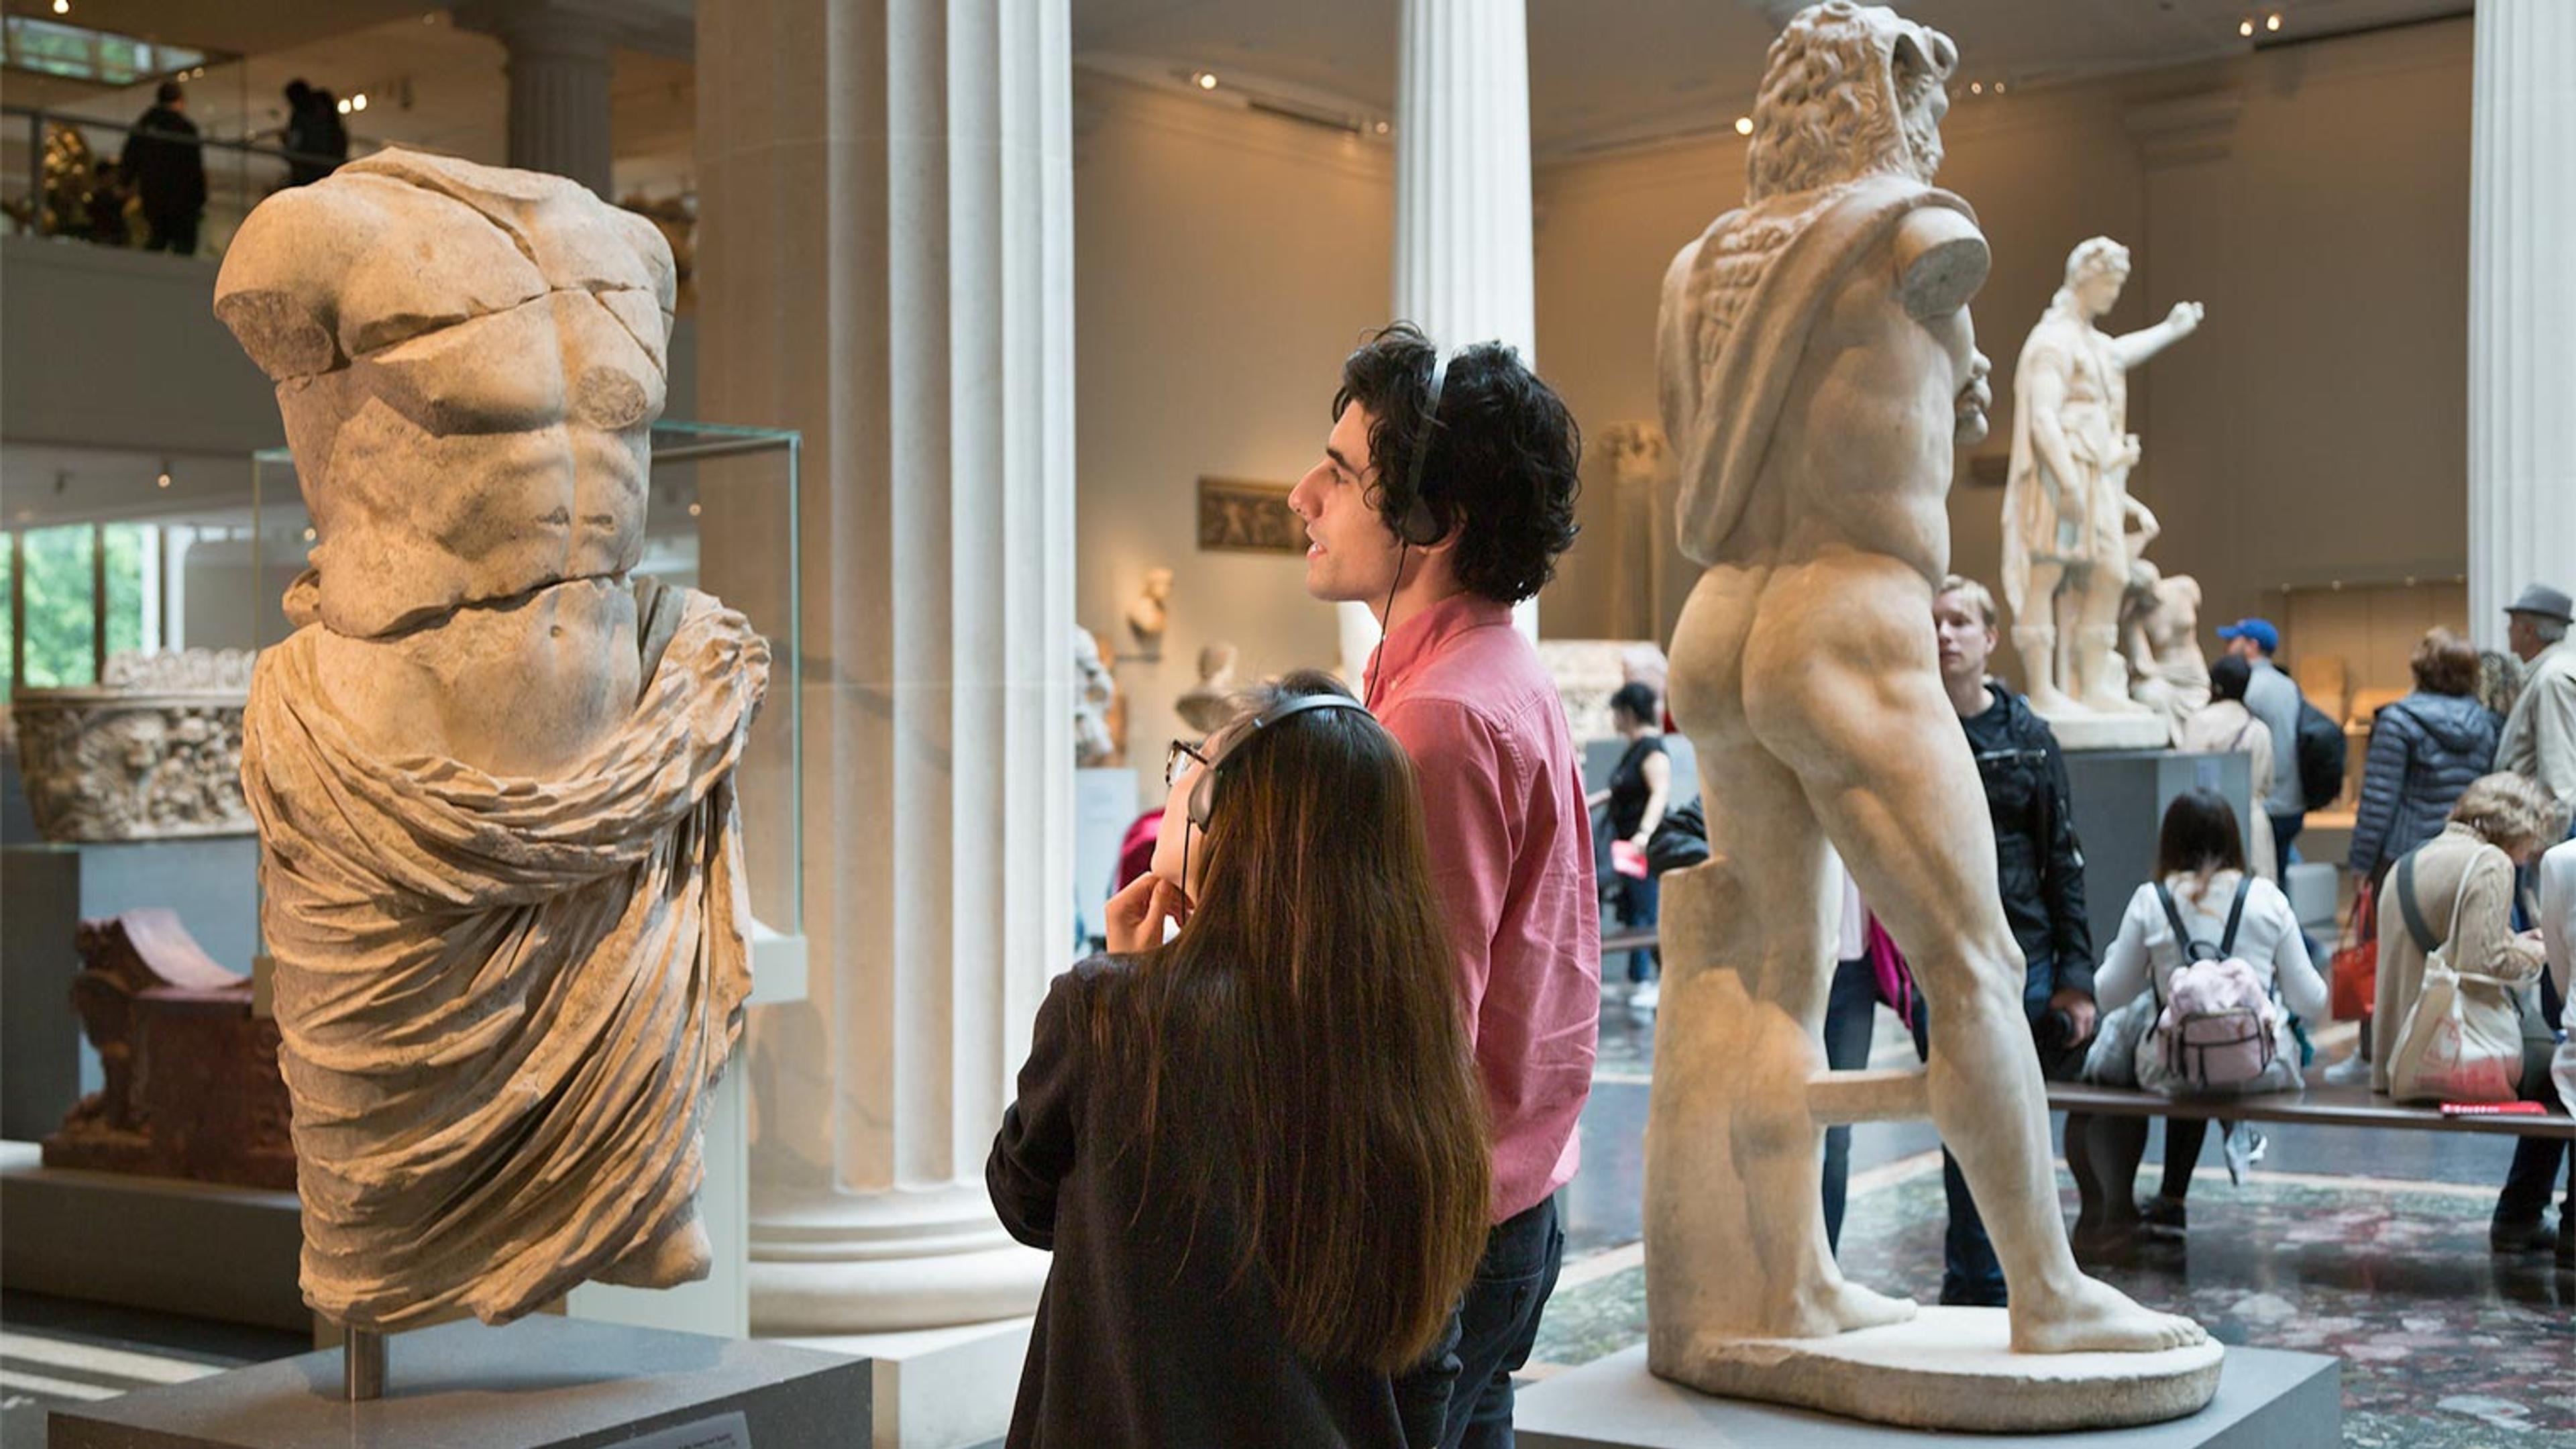 Two people with headphones stand in the Greek and Roman galleries